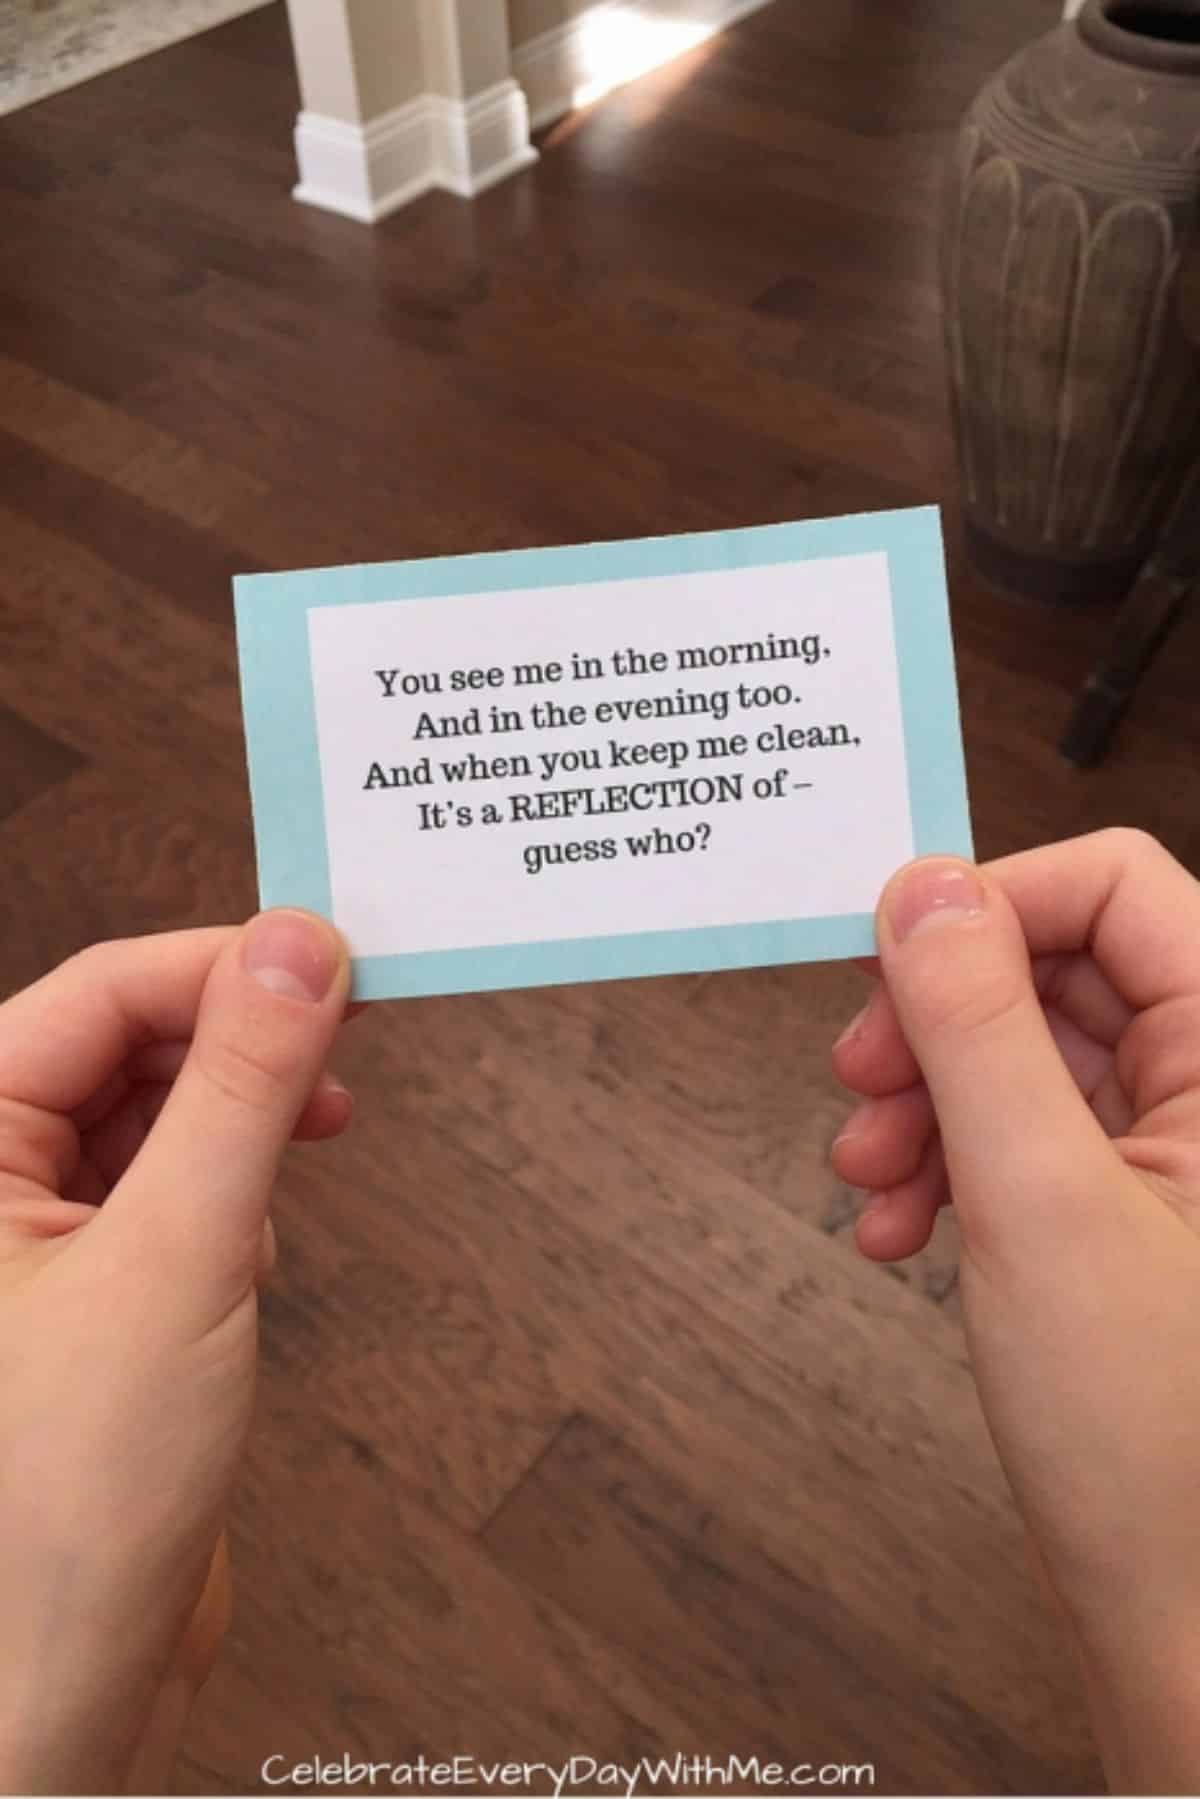 Hands are holding a scavenger hunt card with instructions.